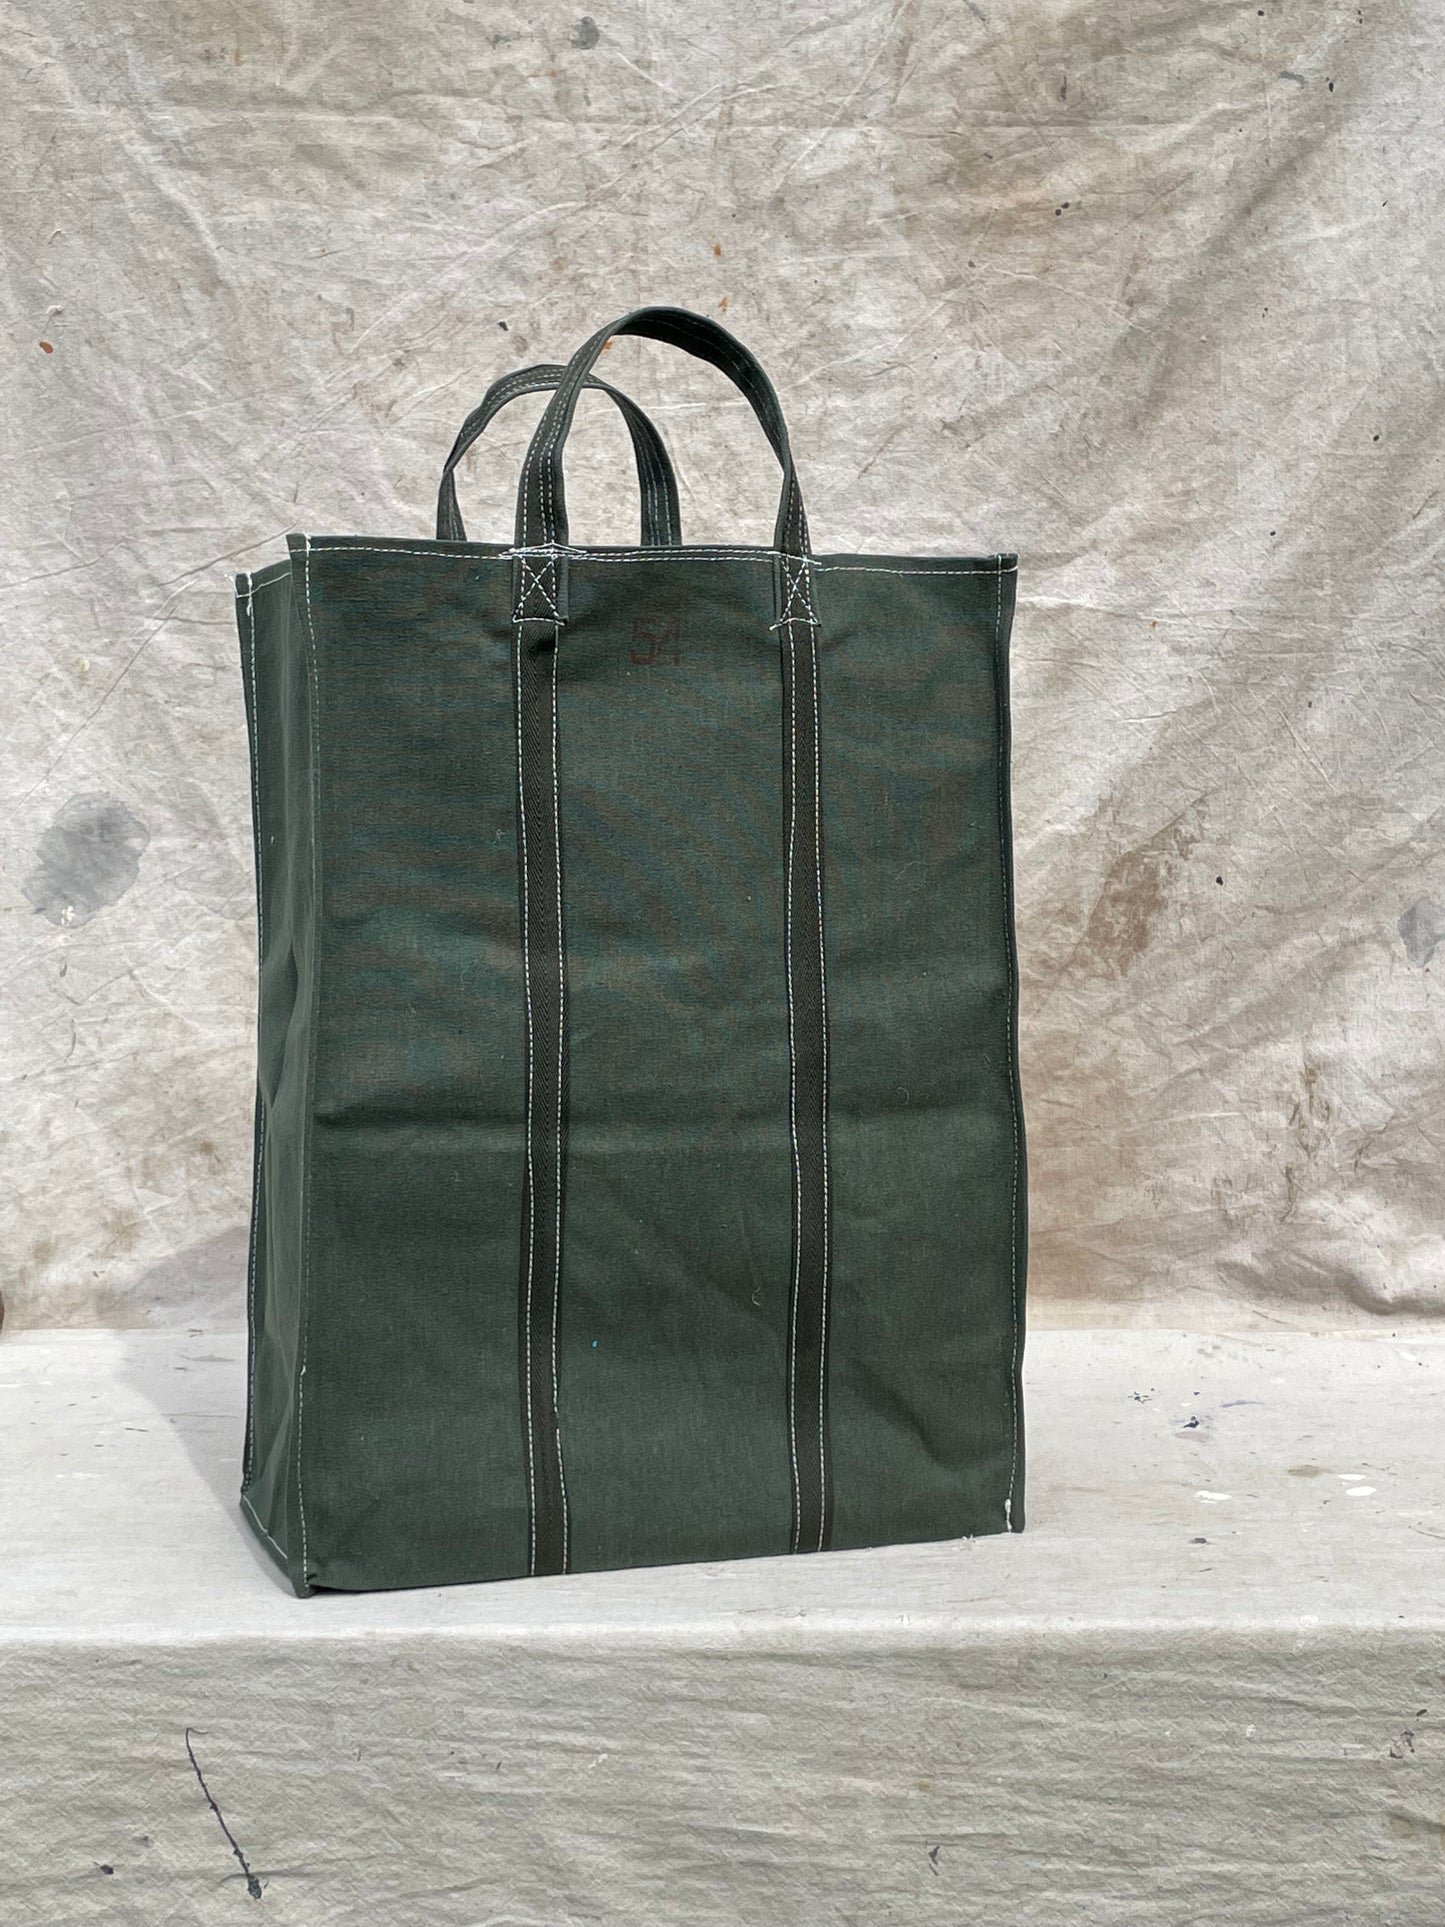 Heavy Duty Natural Canvas Tote Bag Size 54